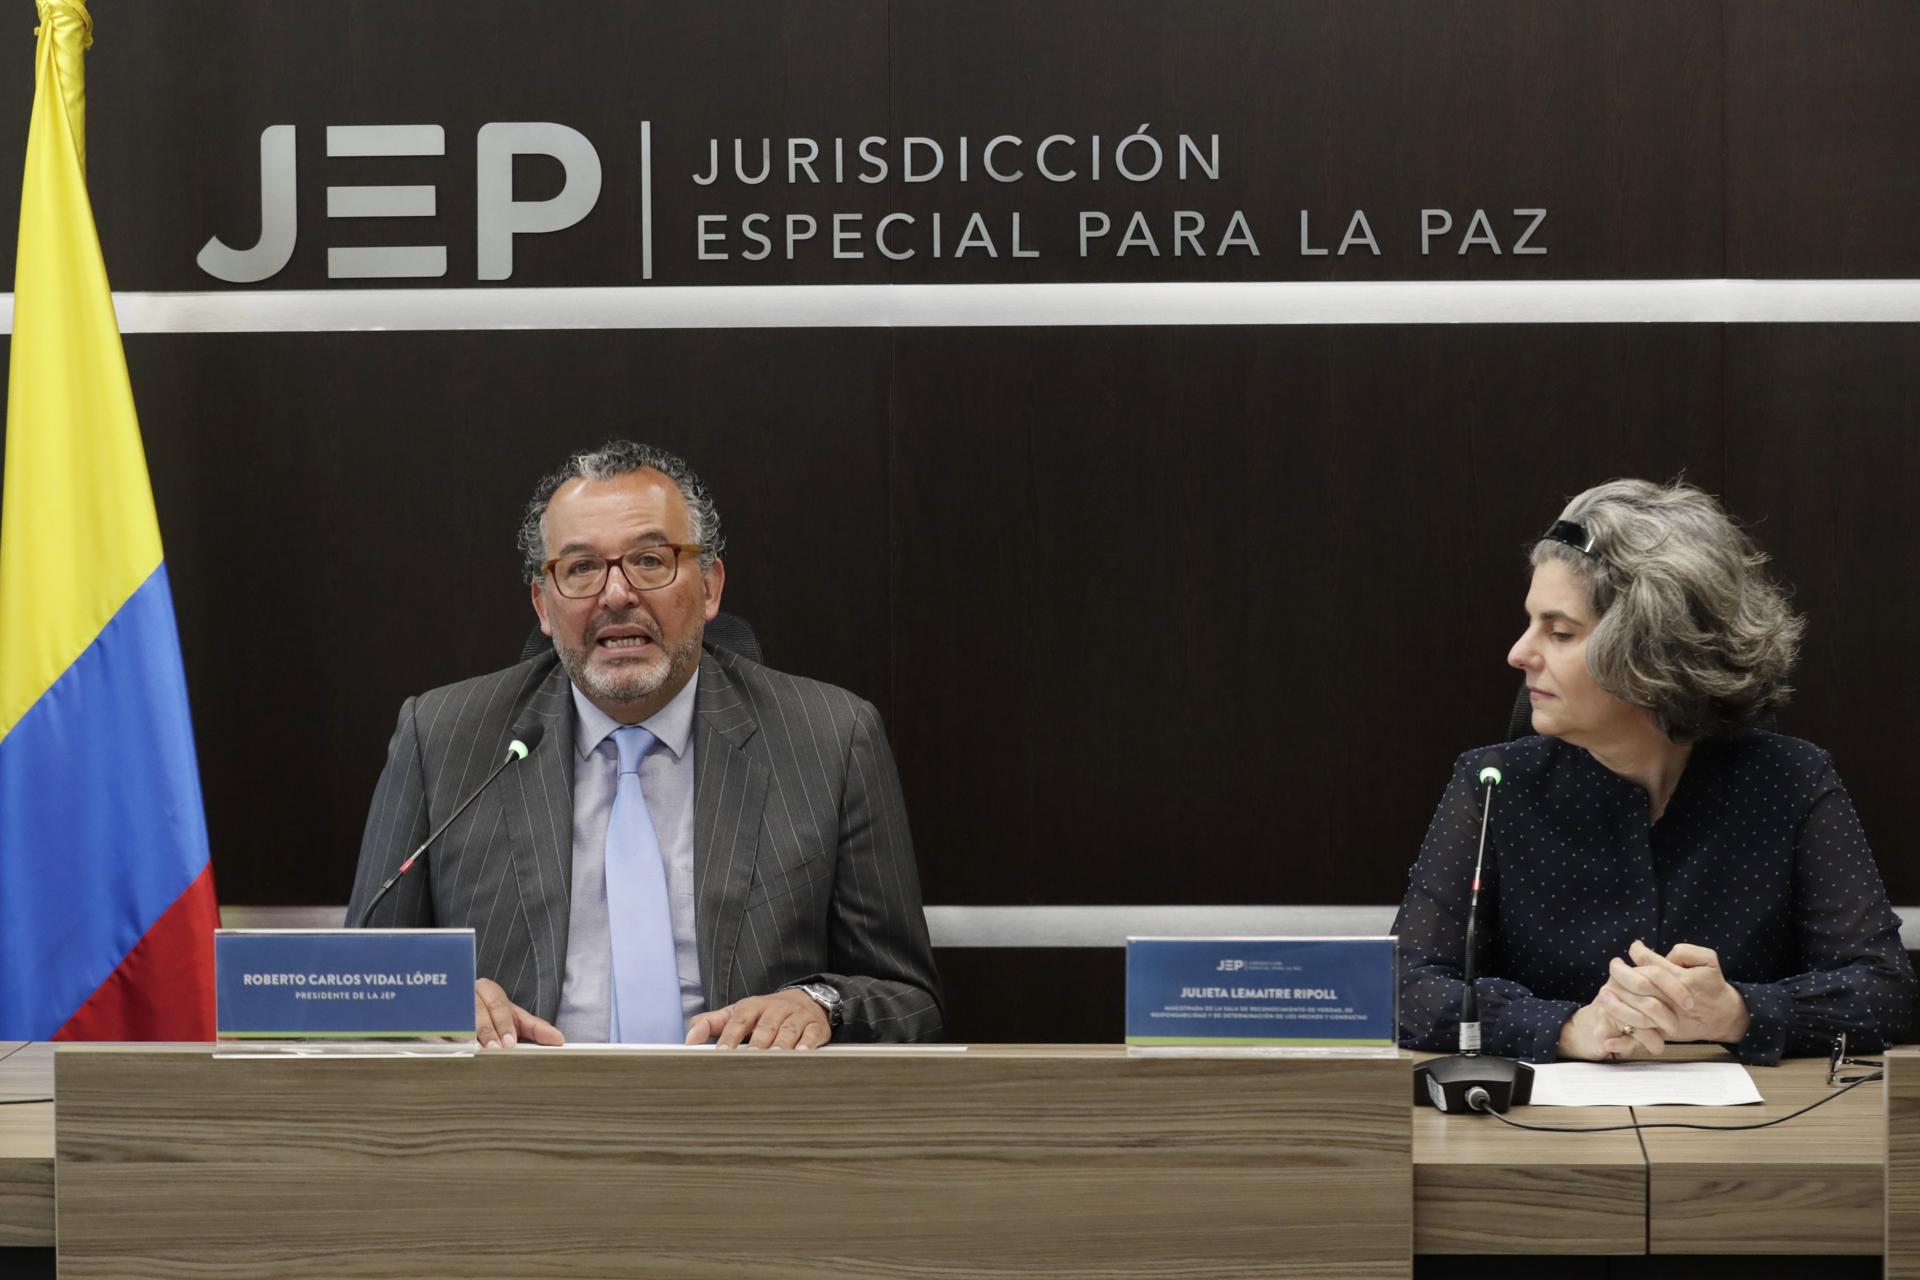 The chief justice of Colombia's Special Jurisdiction for Peace (JEP), Roberto Carlos Vidal (left), speaks alongside Judge Julieta Lemaitre during a press conference on 7 July 2023 in Bogota, Colombia, after war-crimes charges were announced against 10 ex-FARC mid-level commanders. EFE/Carlos Ortega